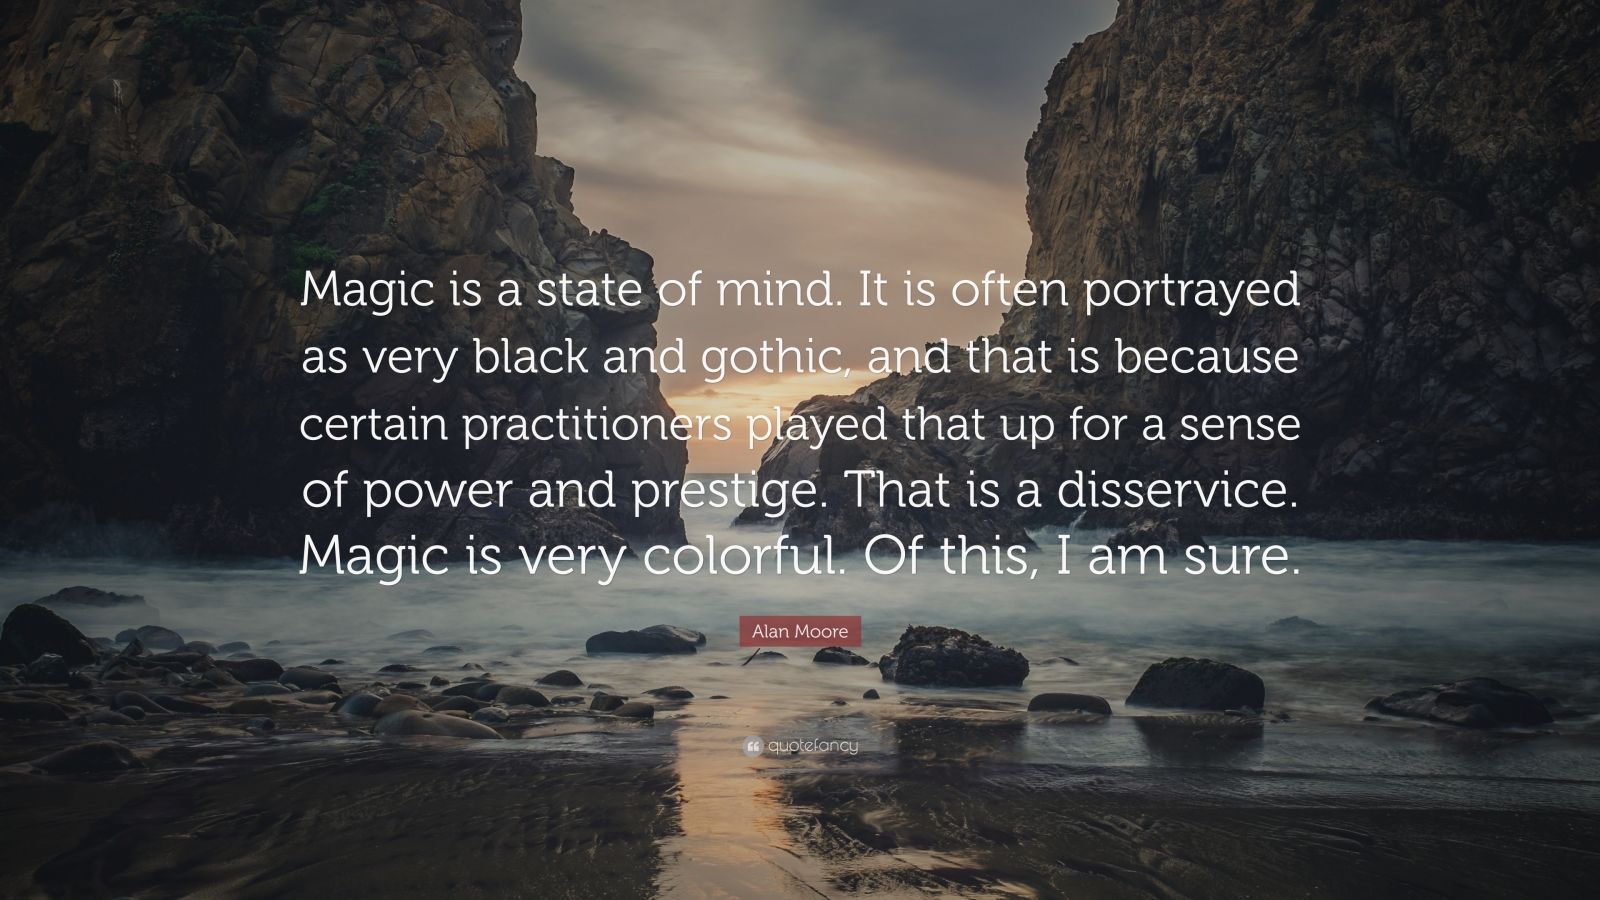 Alan Moore Quote: “Magic is a state of mind. It is often portrayed as ...